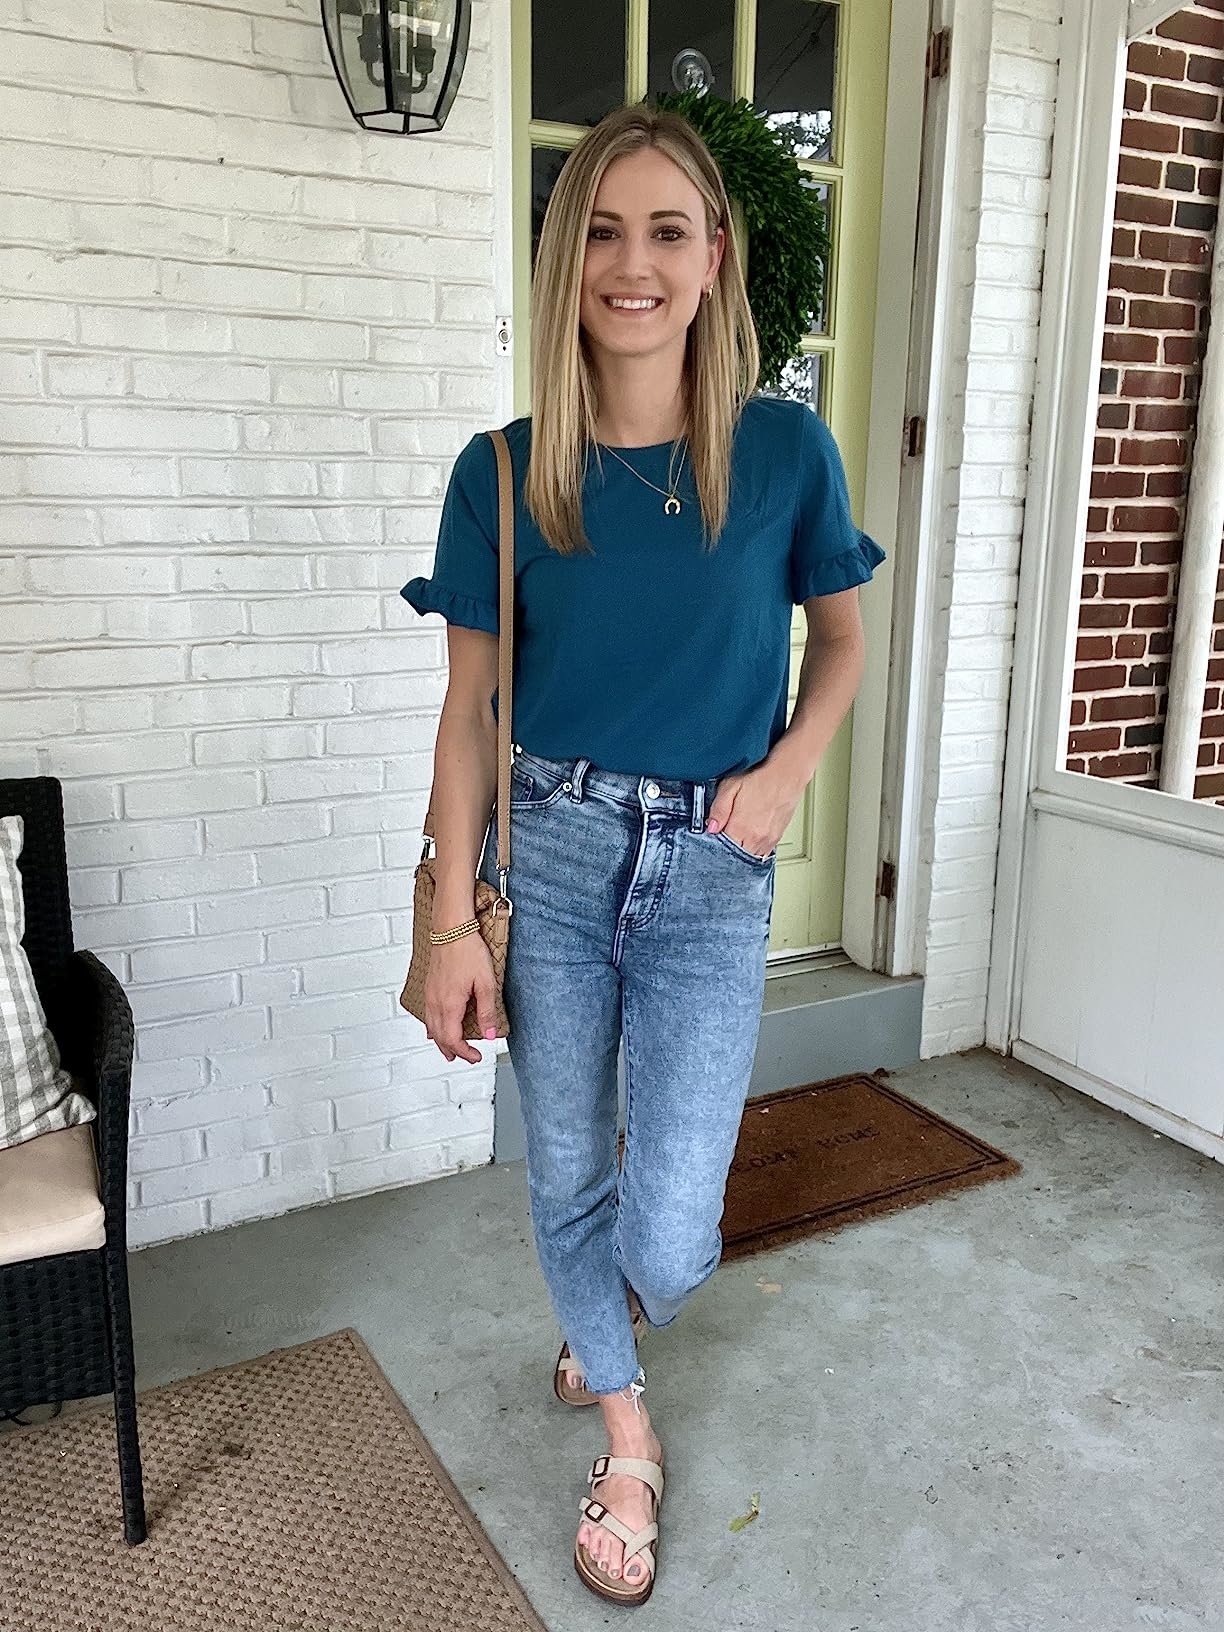 Reviewer in a casual chic outfit with a tucked-in tee, denim jeans, and strappy sandals standing on a porch